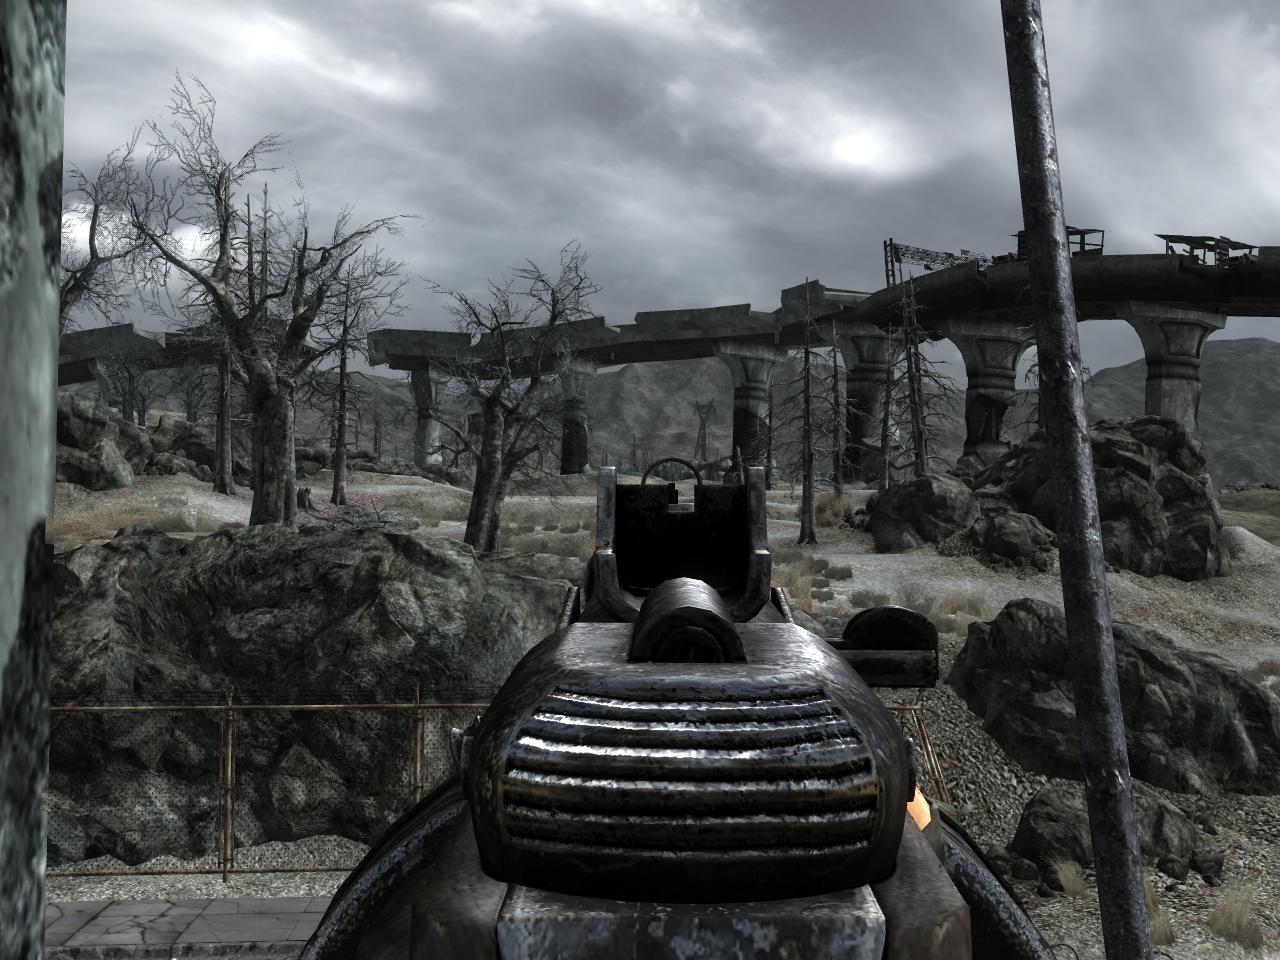 Fallout 3 with about 50 graphics/visual mods : r/gaming